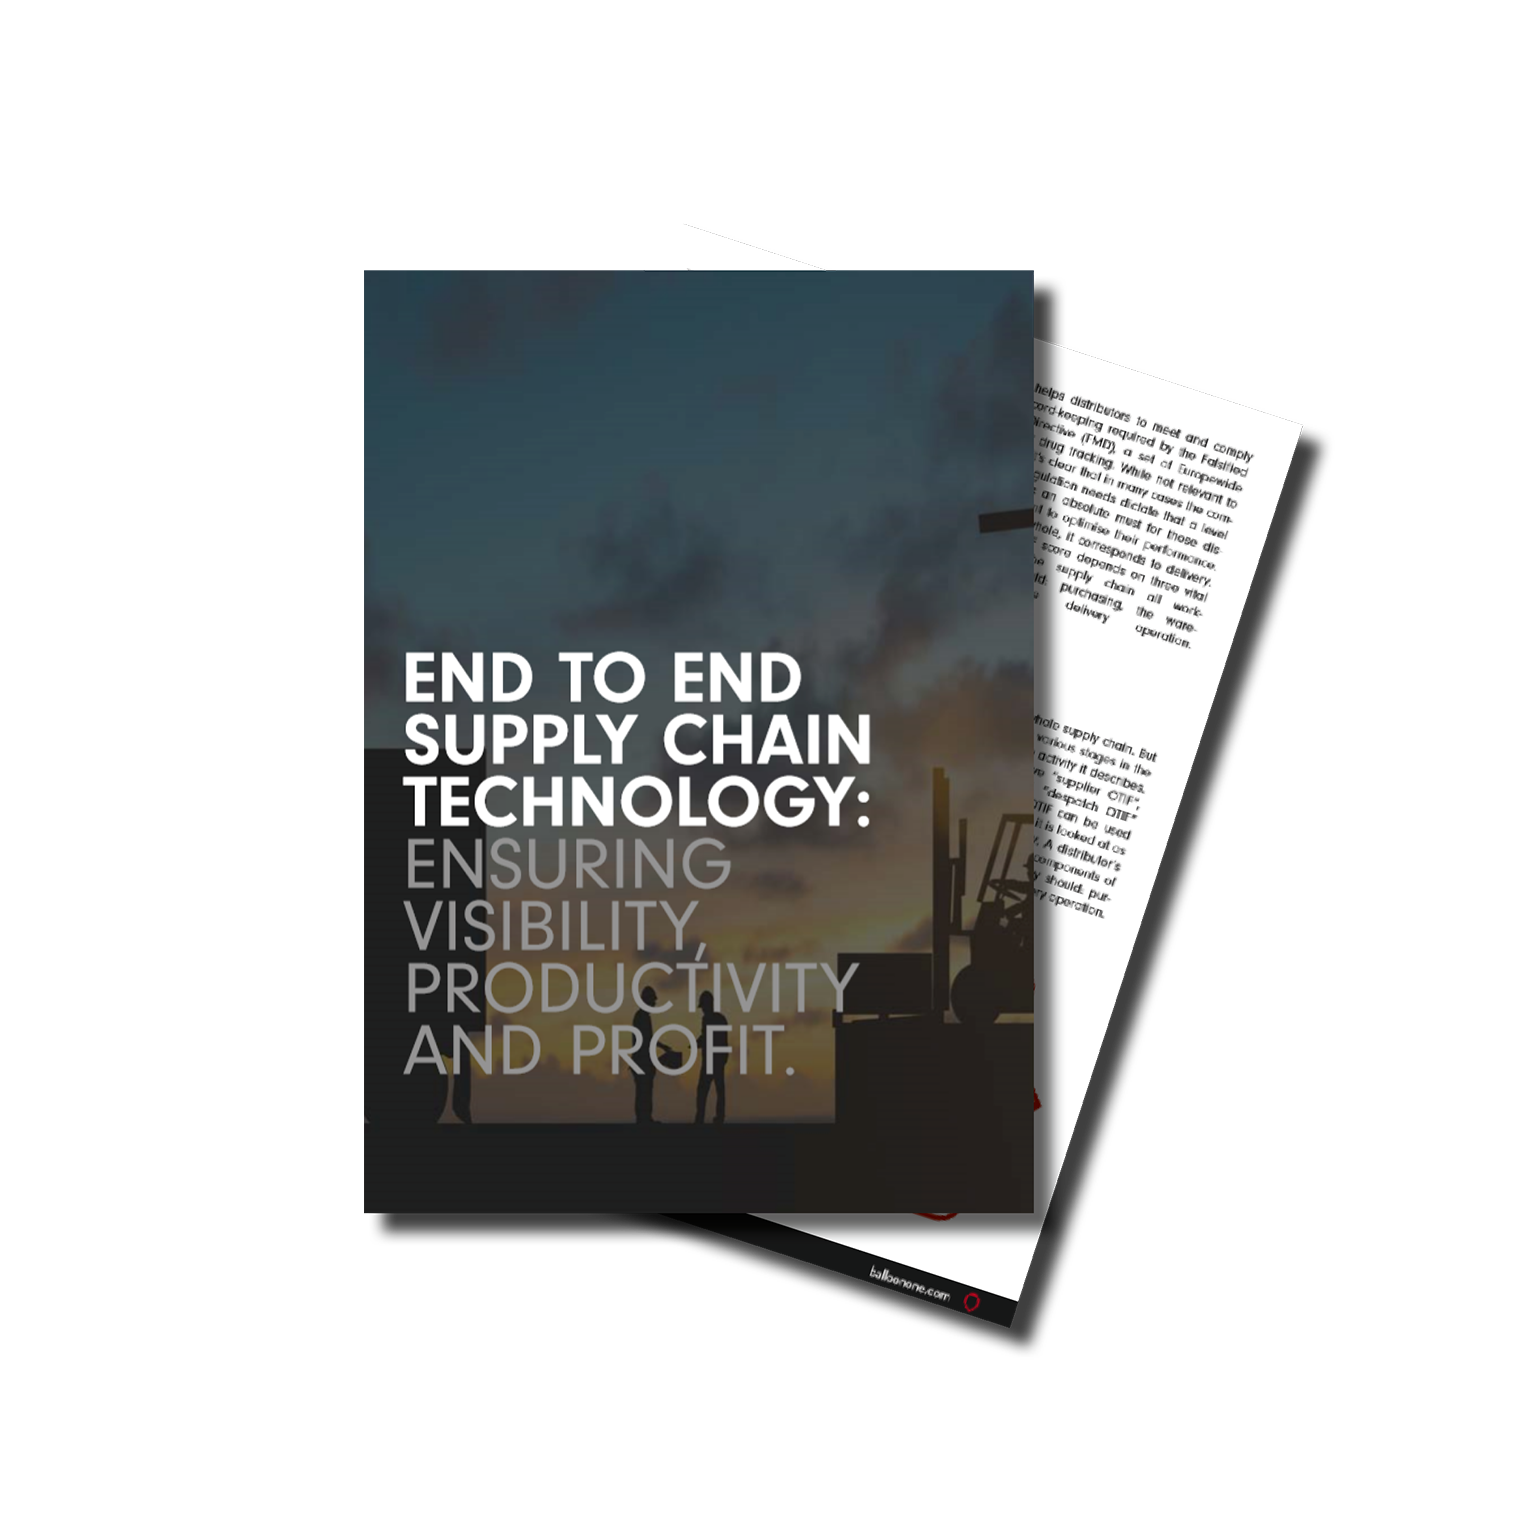 End-to-end-supply-chain-ensuring-visibility-productivity-and-profit-Whitepaper-Preview